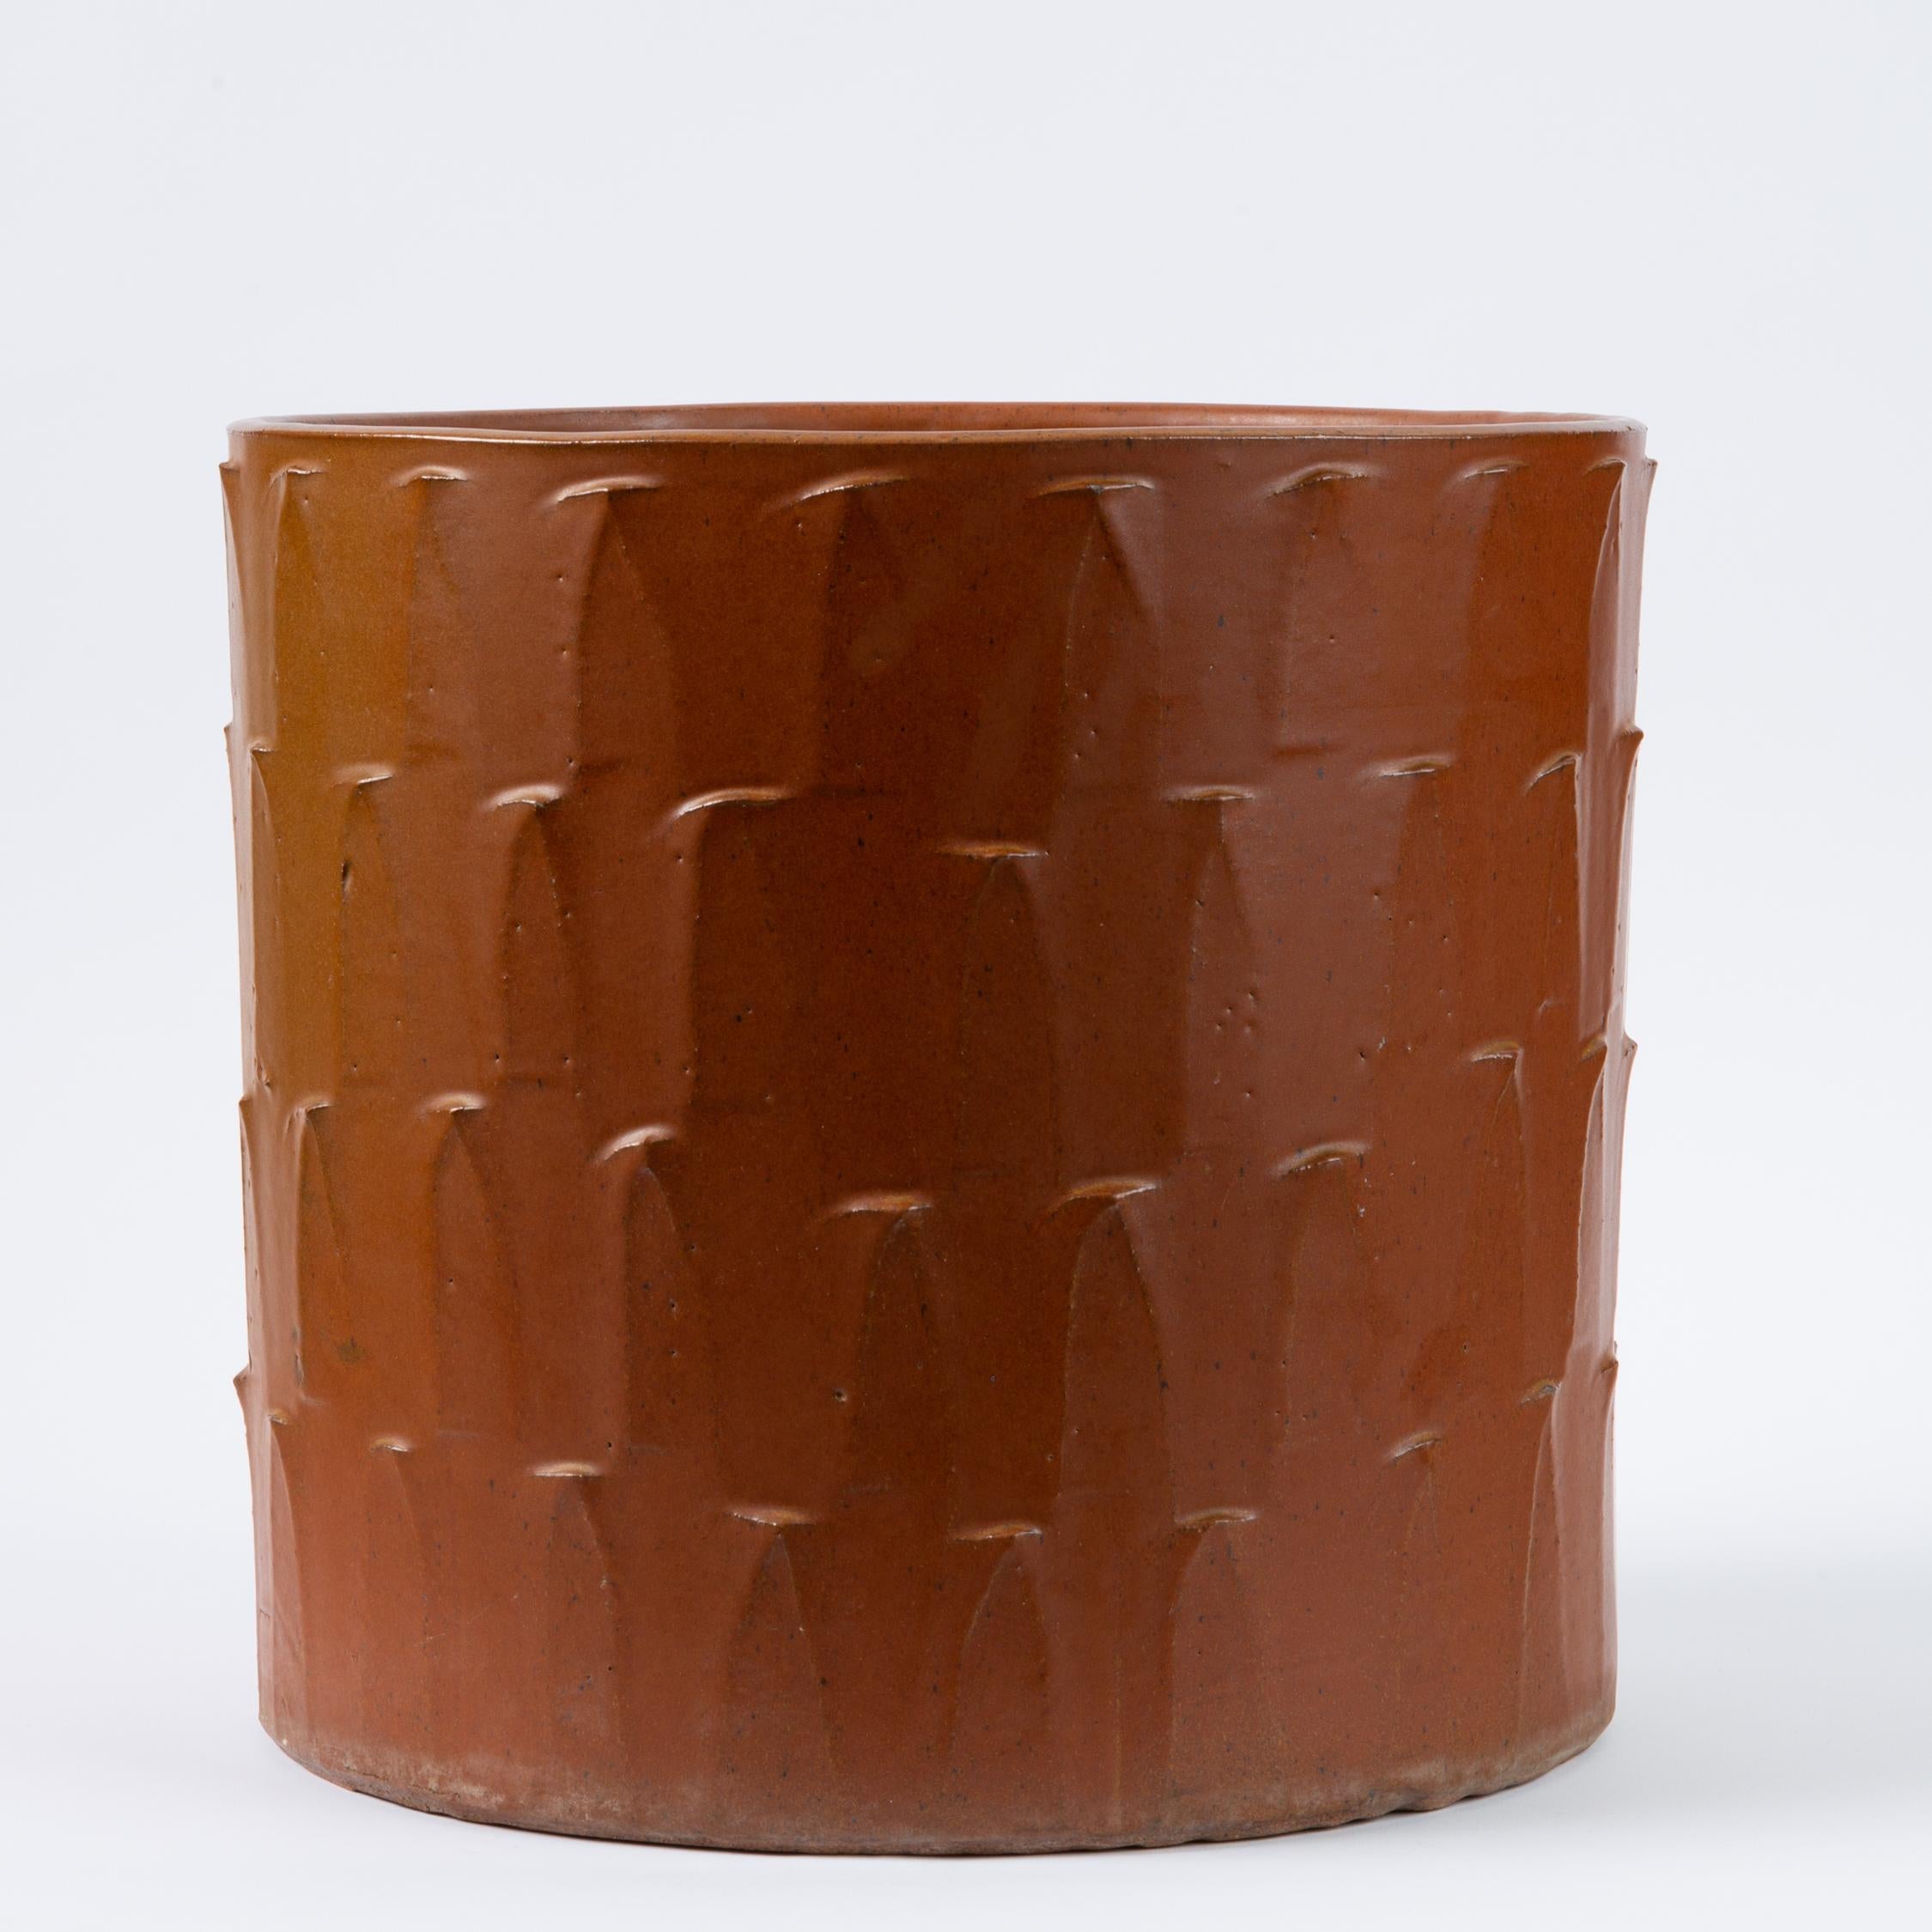 Glazed Leaf Planter by David Cressey for Architectural Pottery